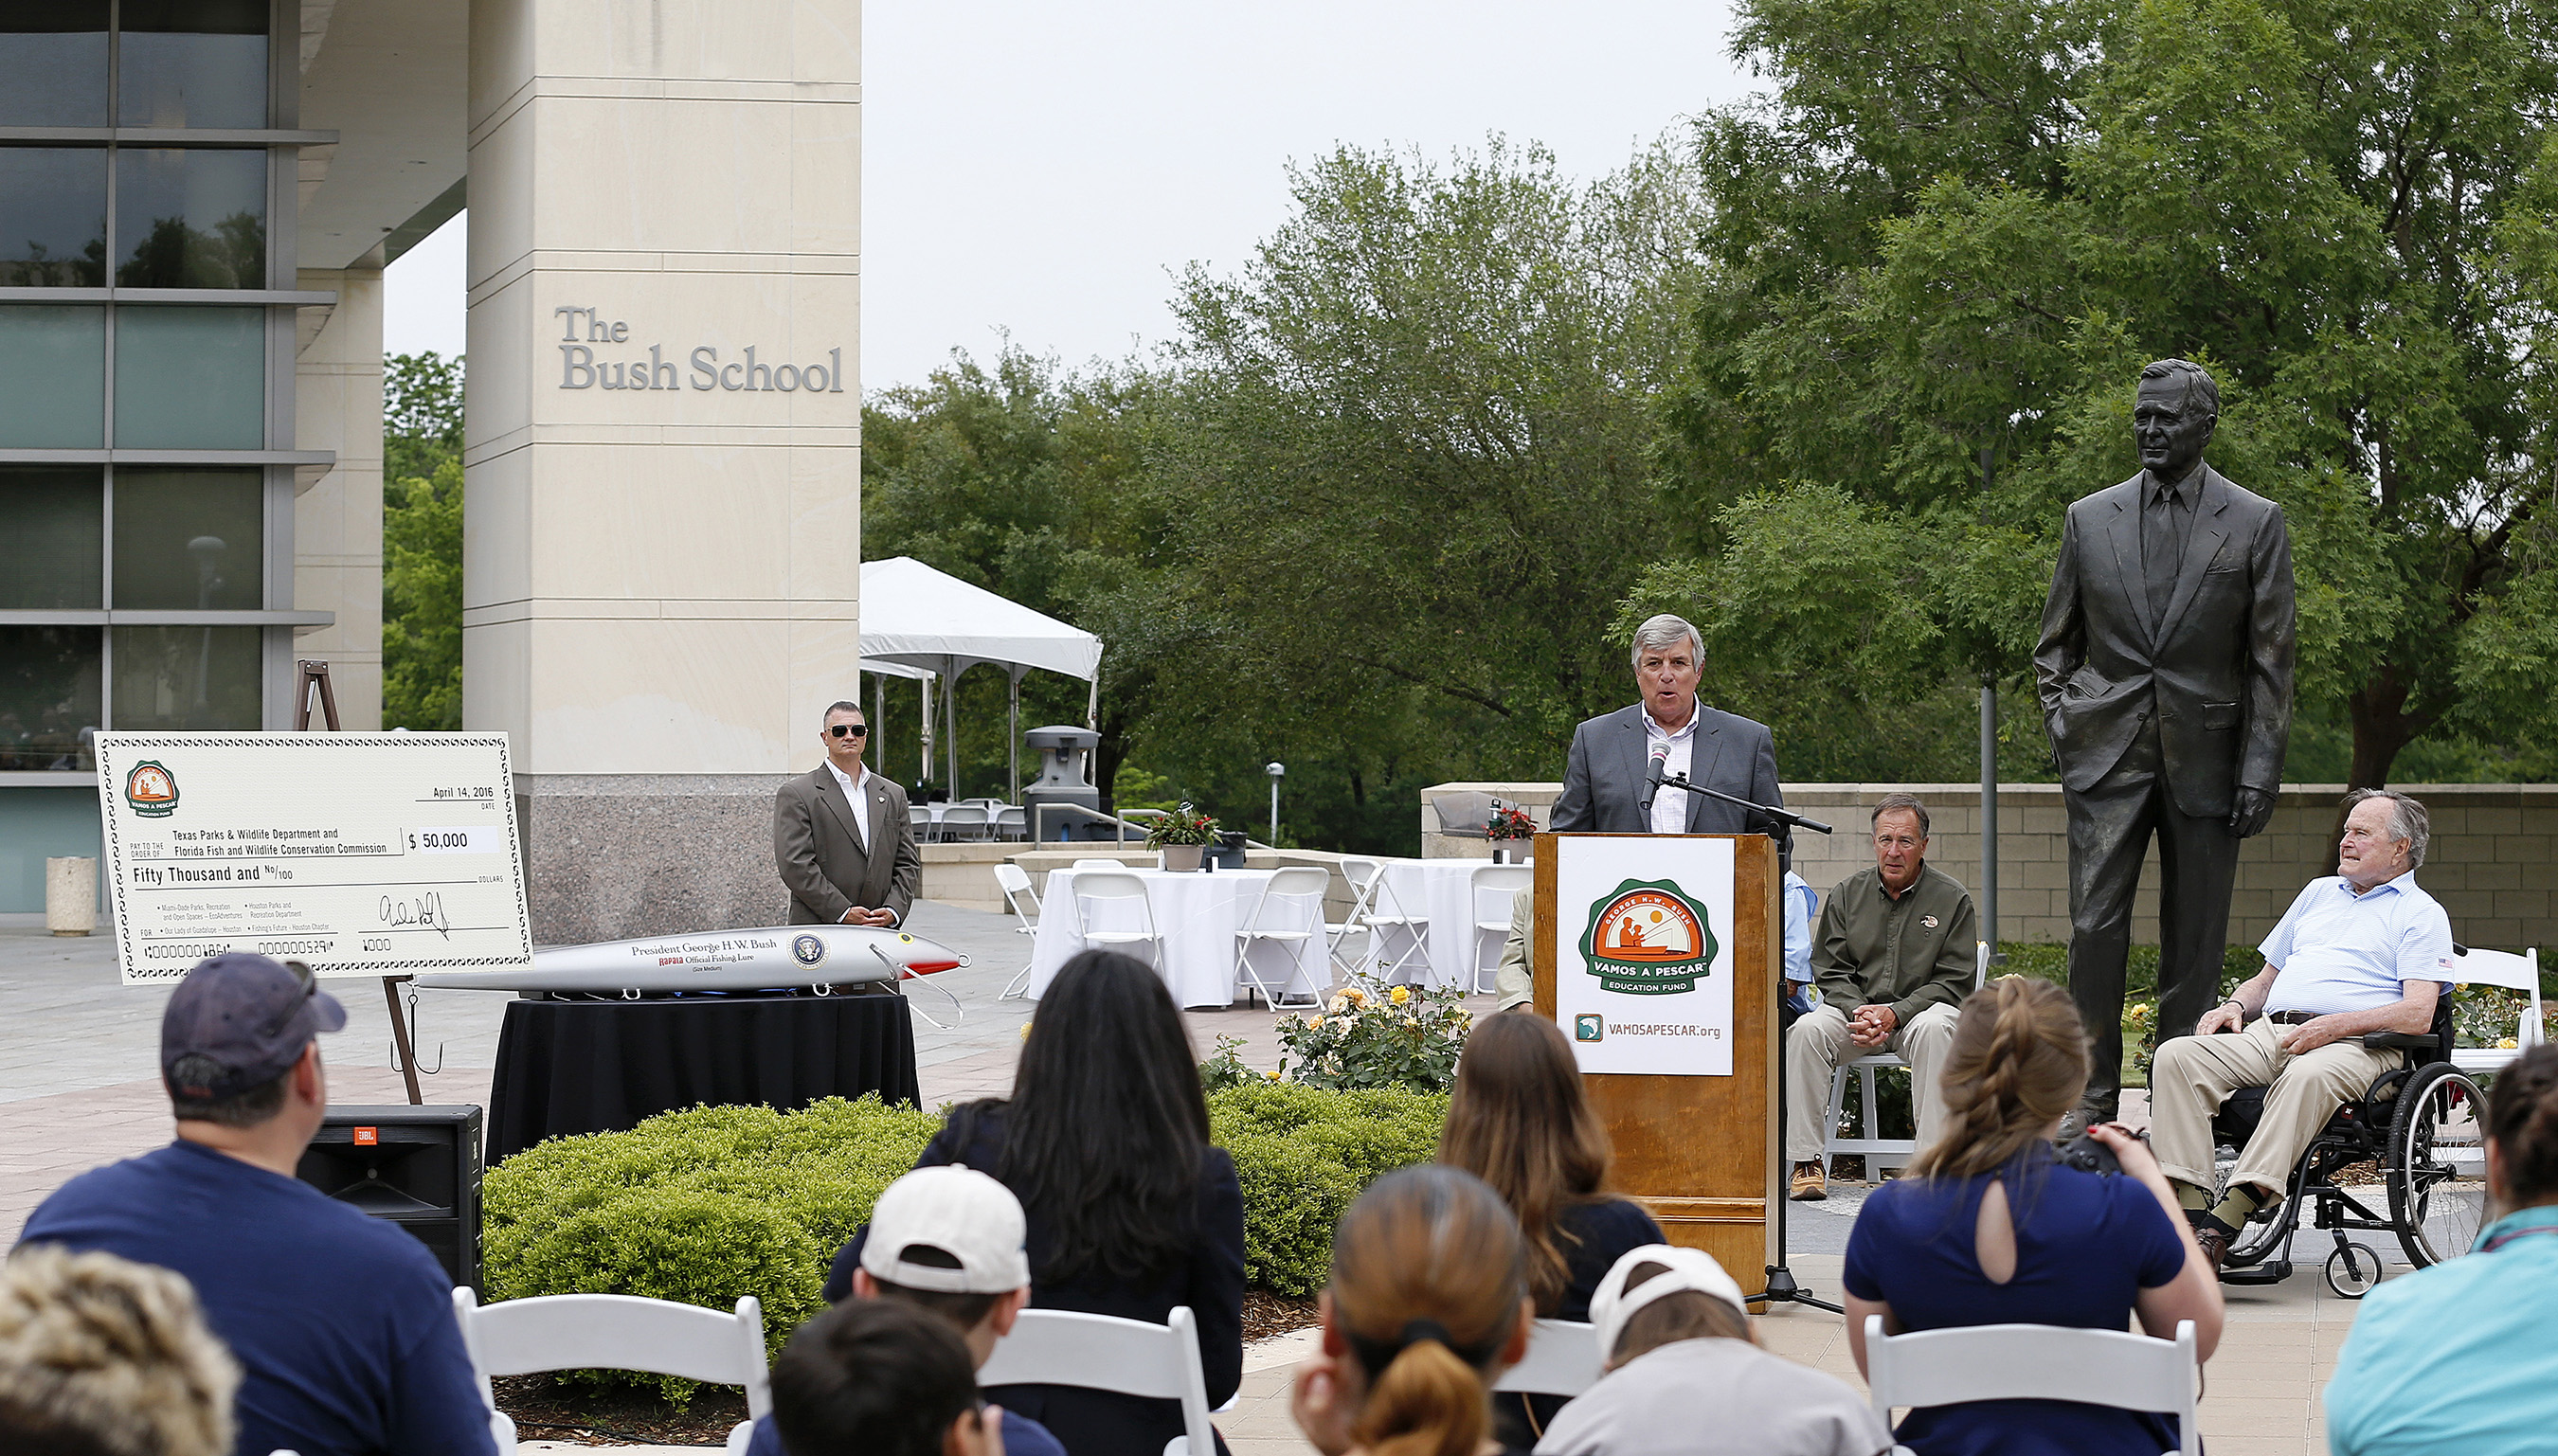 Frank Peterson, President and CEO of Recreational Boating & Fishing Foundation (RBFF), announces a donation to organizations bringing conservation, education and fishing and boating experiences to Hispanic families during a RBFF event at the George Bush Presidential Library on Thursday, April 14, 2016, in College Station, Texas. RBFF is a nonprofit organization whose mission is to increase participation in recreational angling and boating, thereby protecting and restoring the nation’s aquatic natural resources. (Aaron M. Sprecher/AP Images for RBFF)